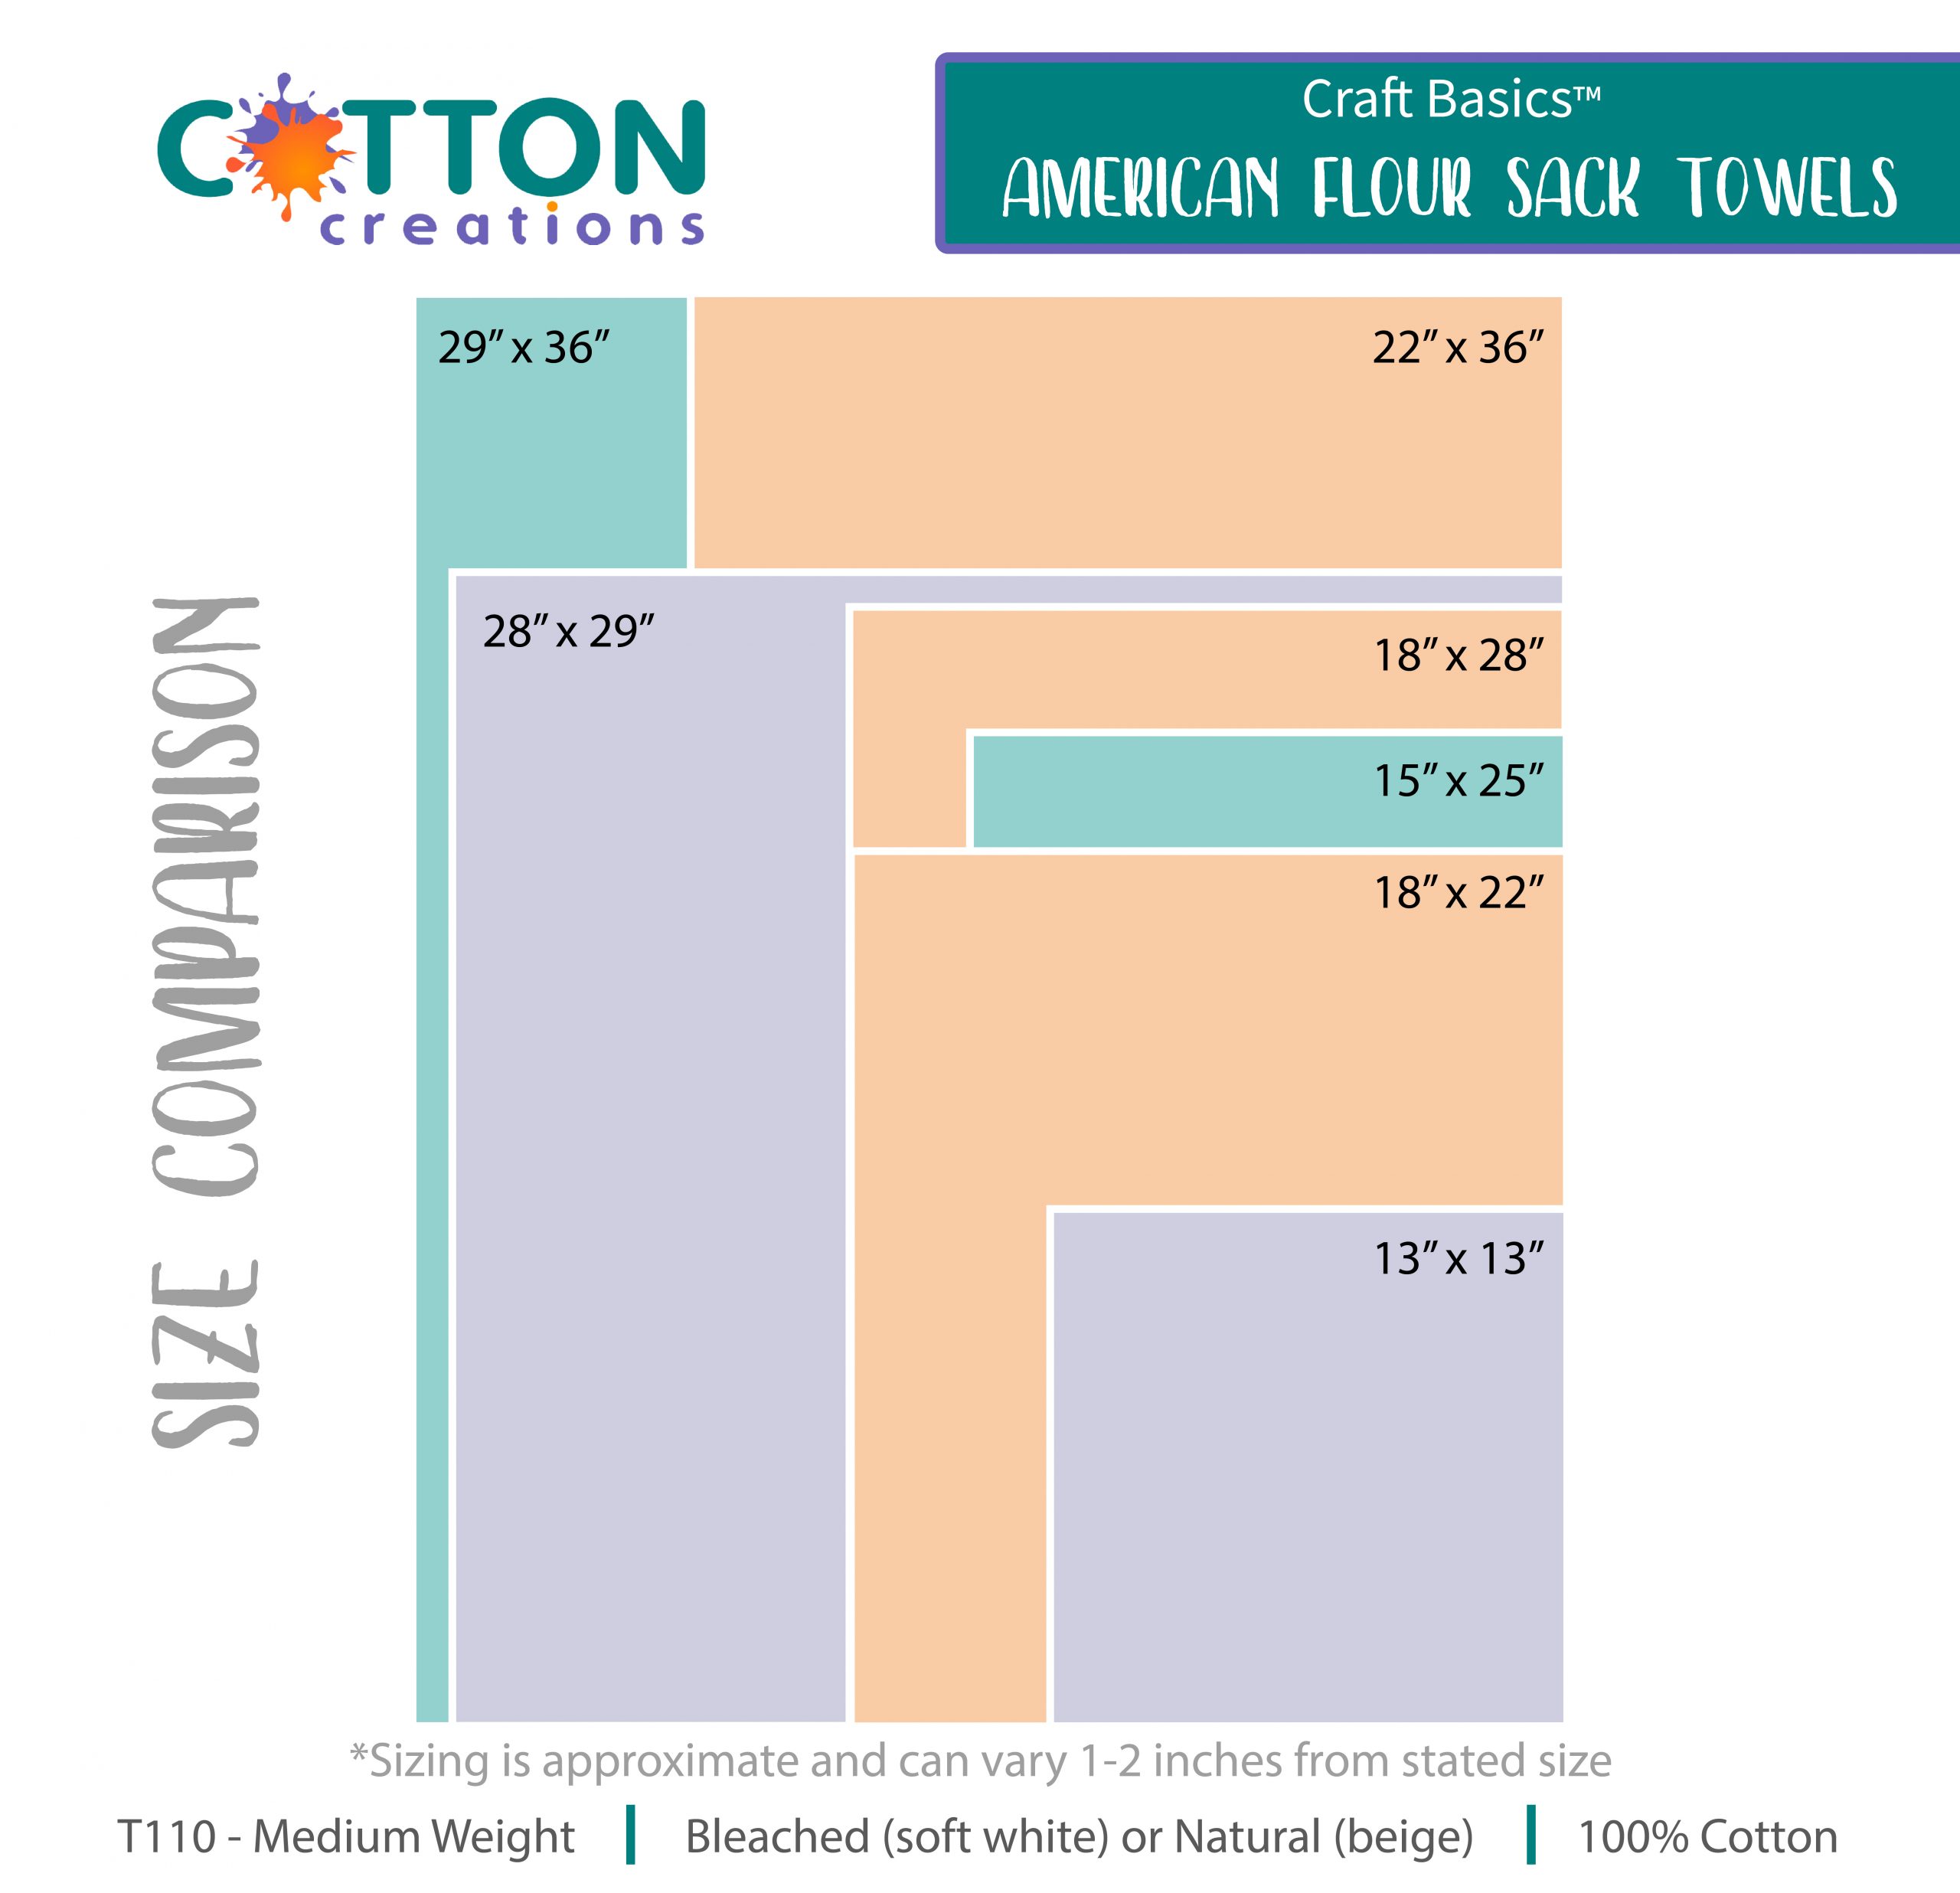 https://cottoncreations.com/content/uploads/2017/11/American-FST-Size-Comparison-Template-scaled.jpg